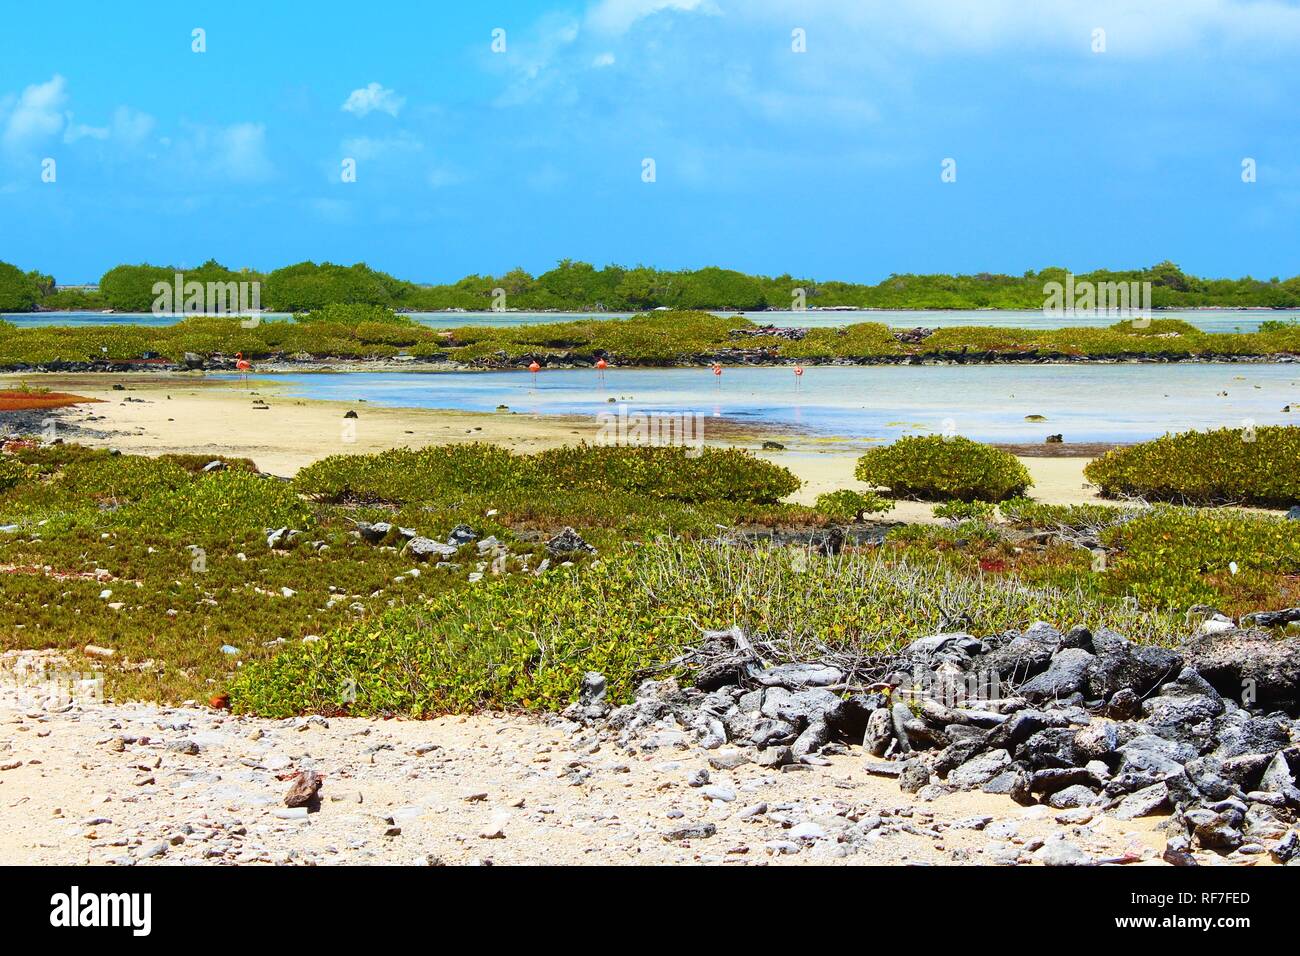 A group of Flamingos stand in some water  surrounded by the wild, rugged landscape of the Caribbean island of Bonaire. Stock Photo